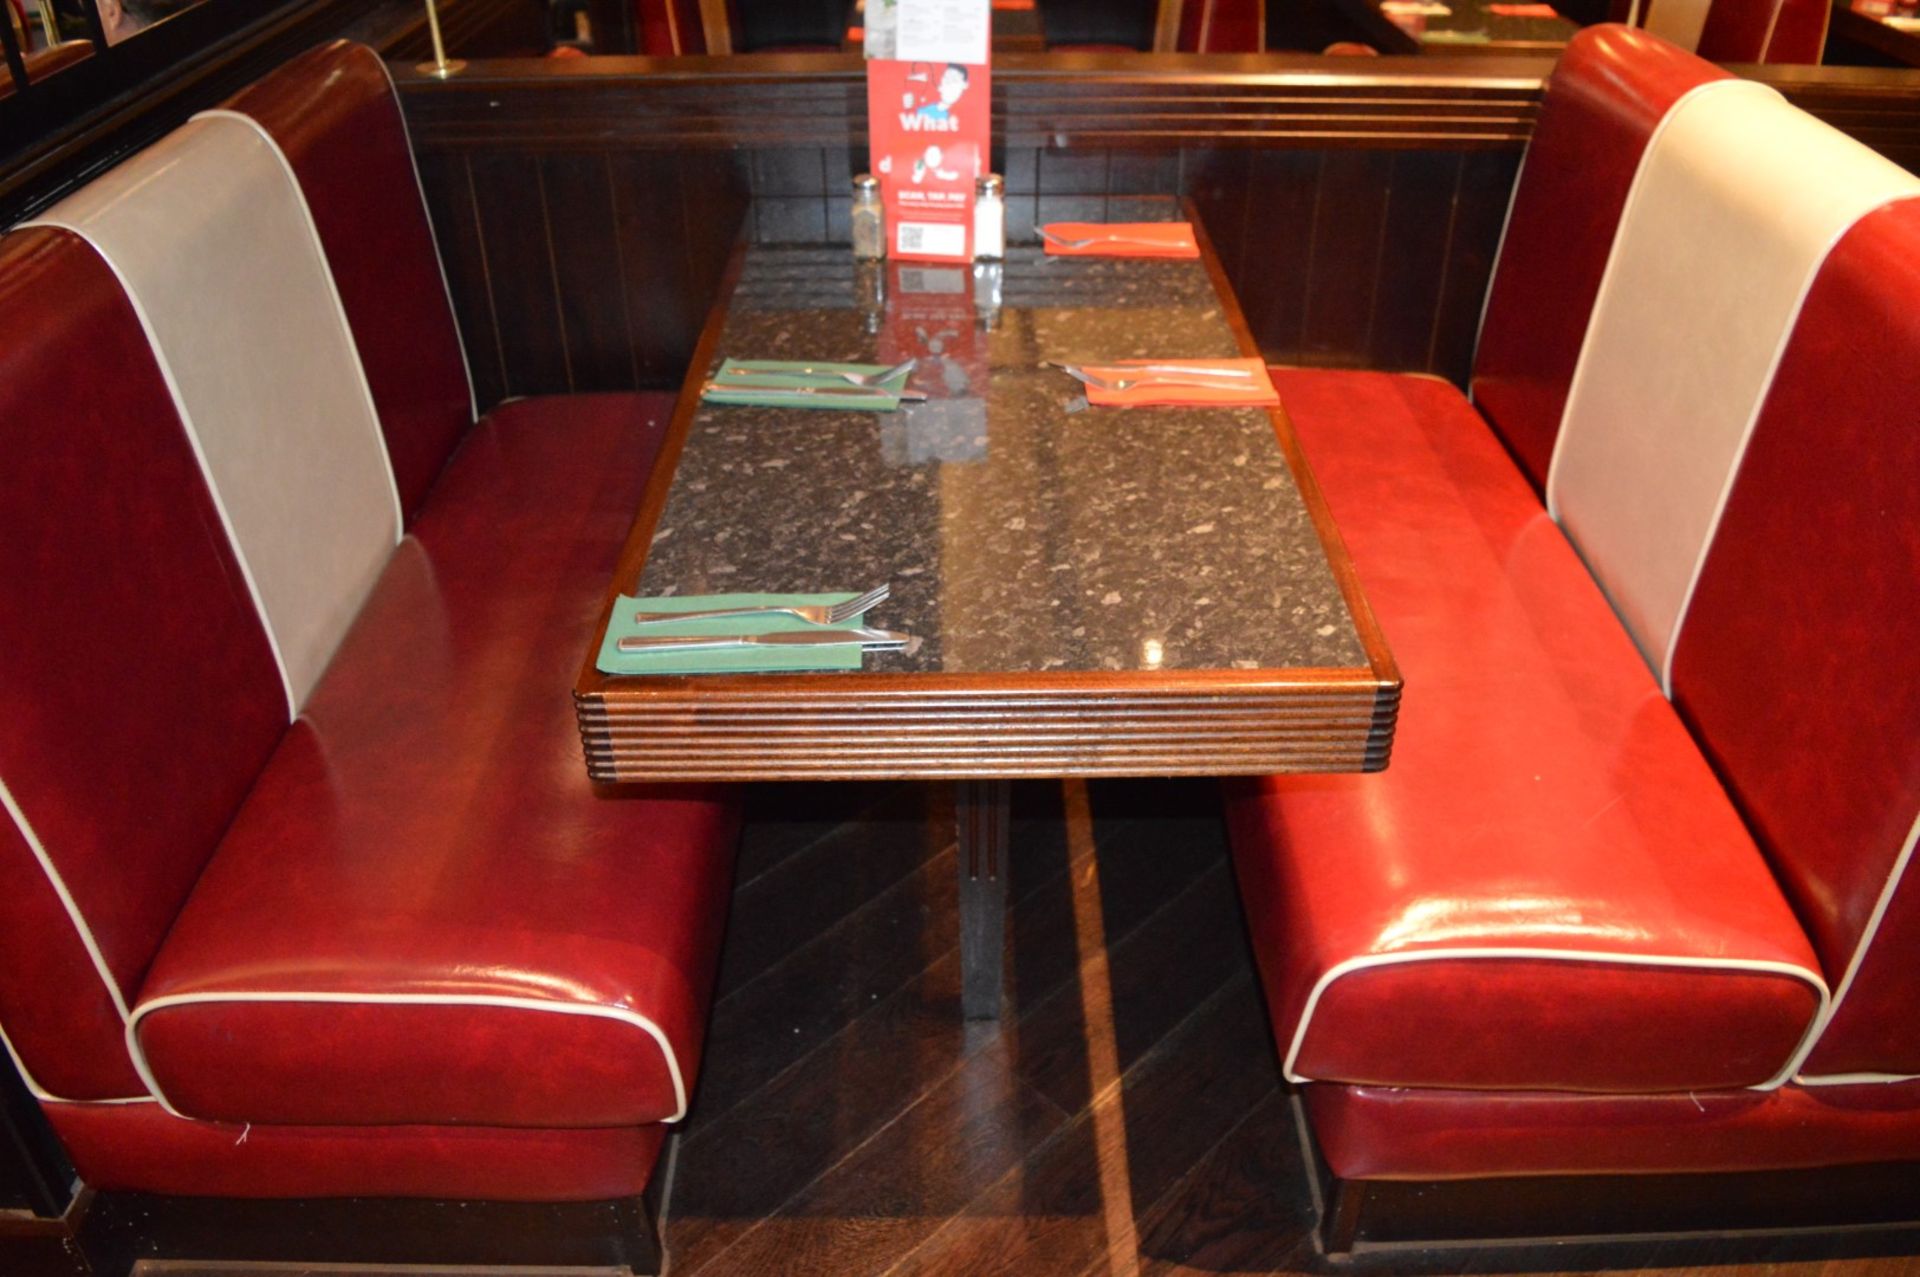 1 x Selection of Seating Booths in a 1950's Retro American Diner Design Supplied in Good Condition - - Image 3 of 7